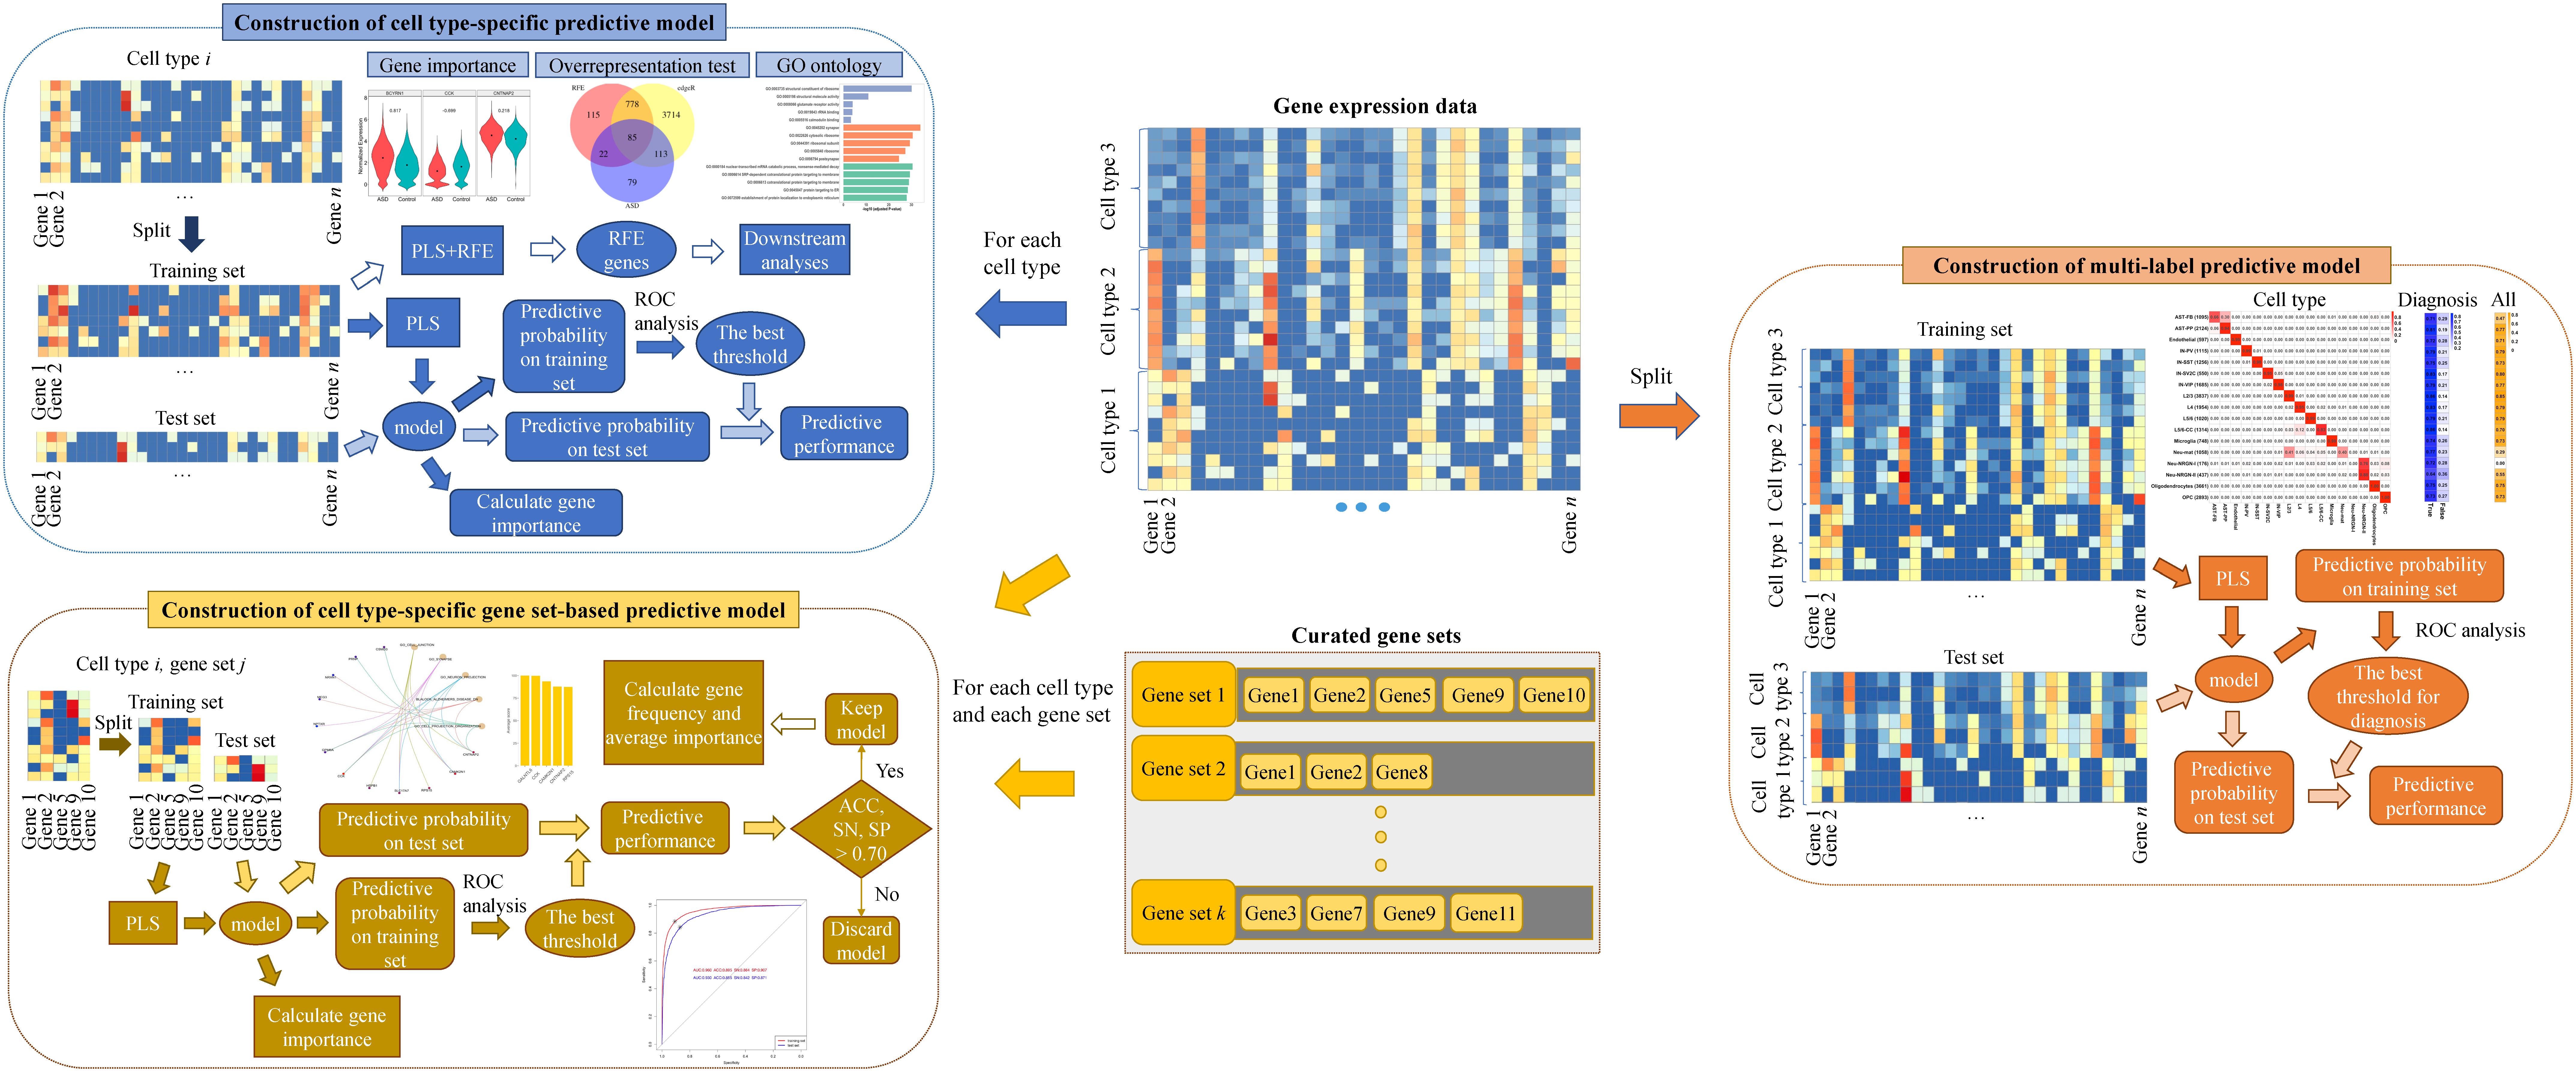 Cell type-specific predictive models perform prioritization of genes and gene sets associated with autism